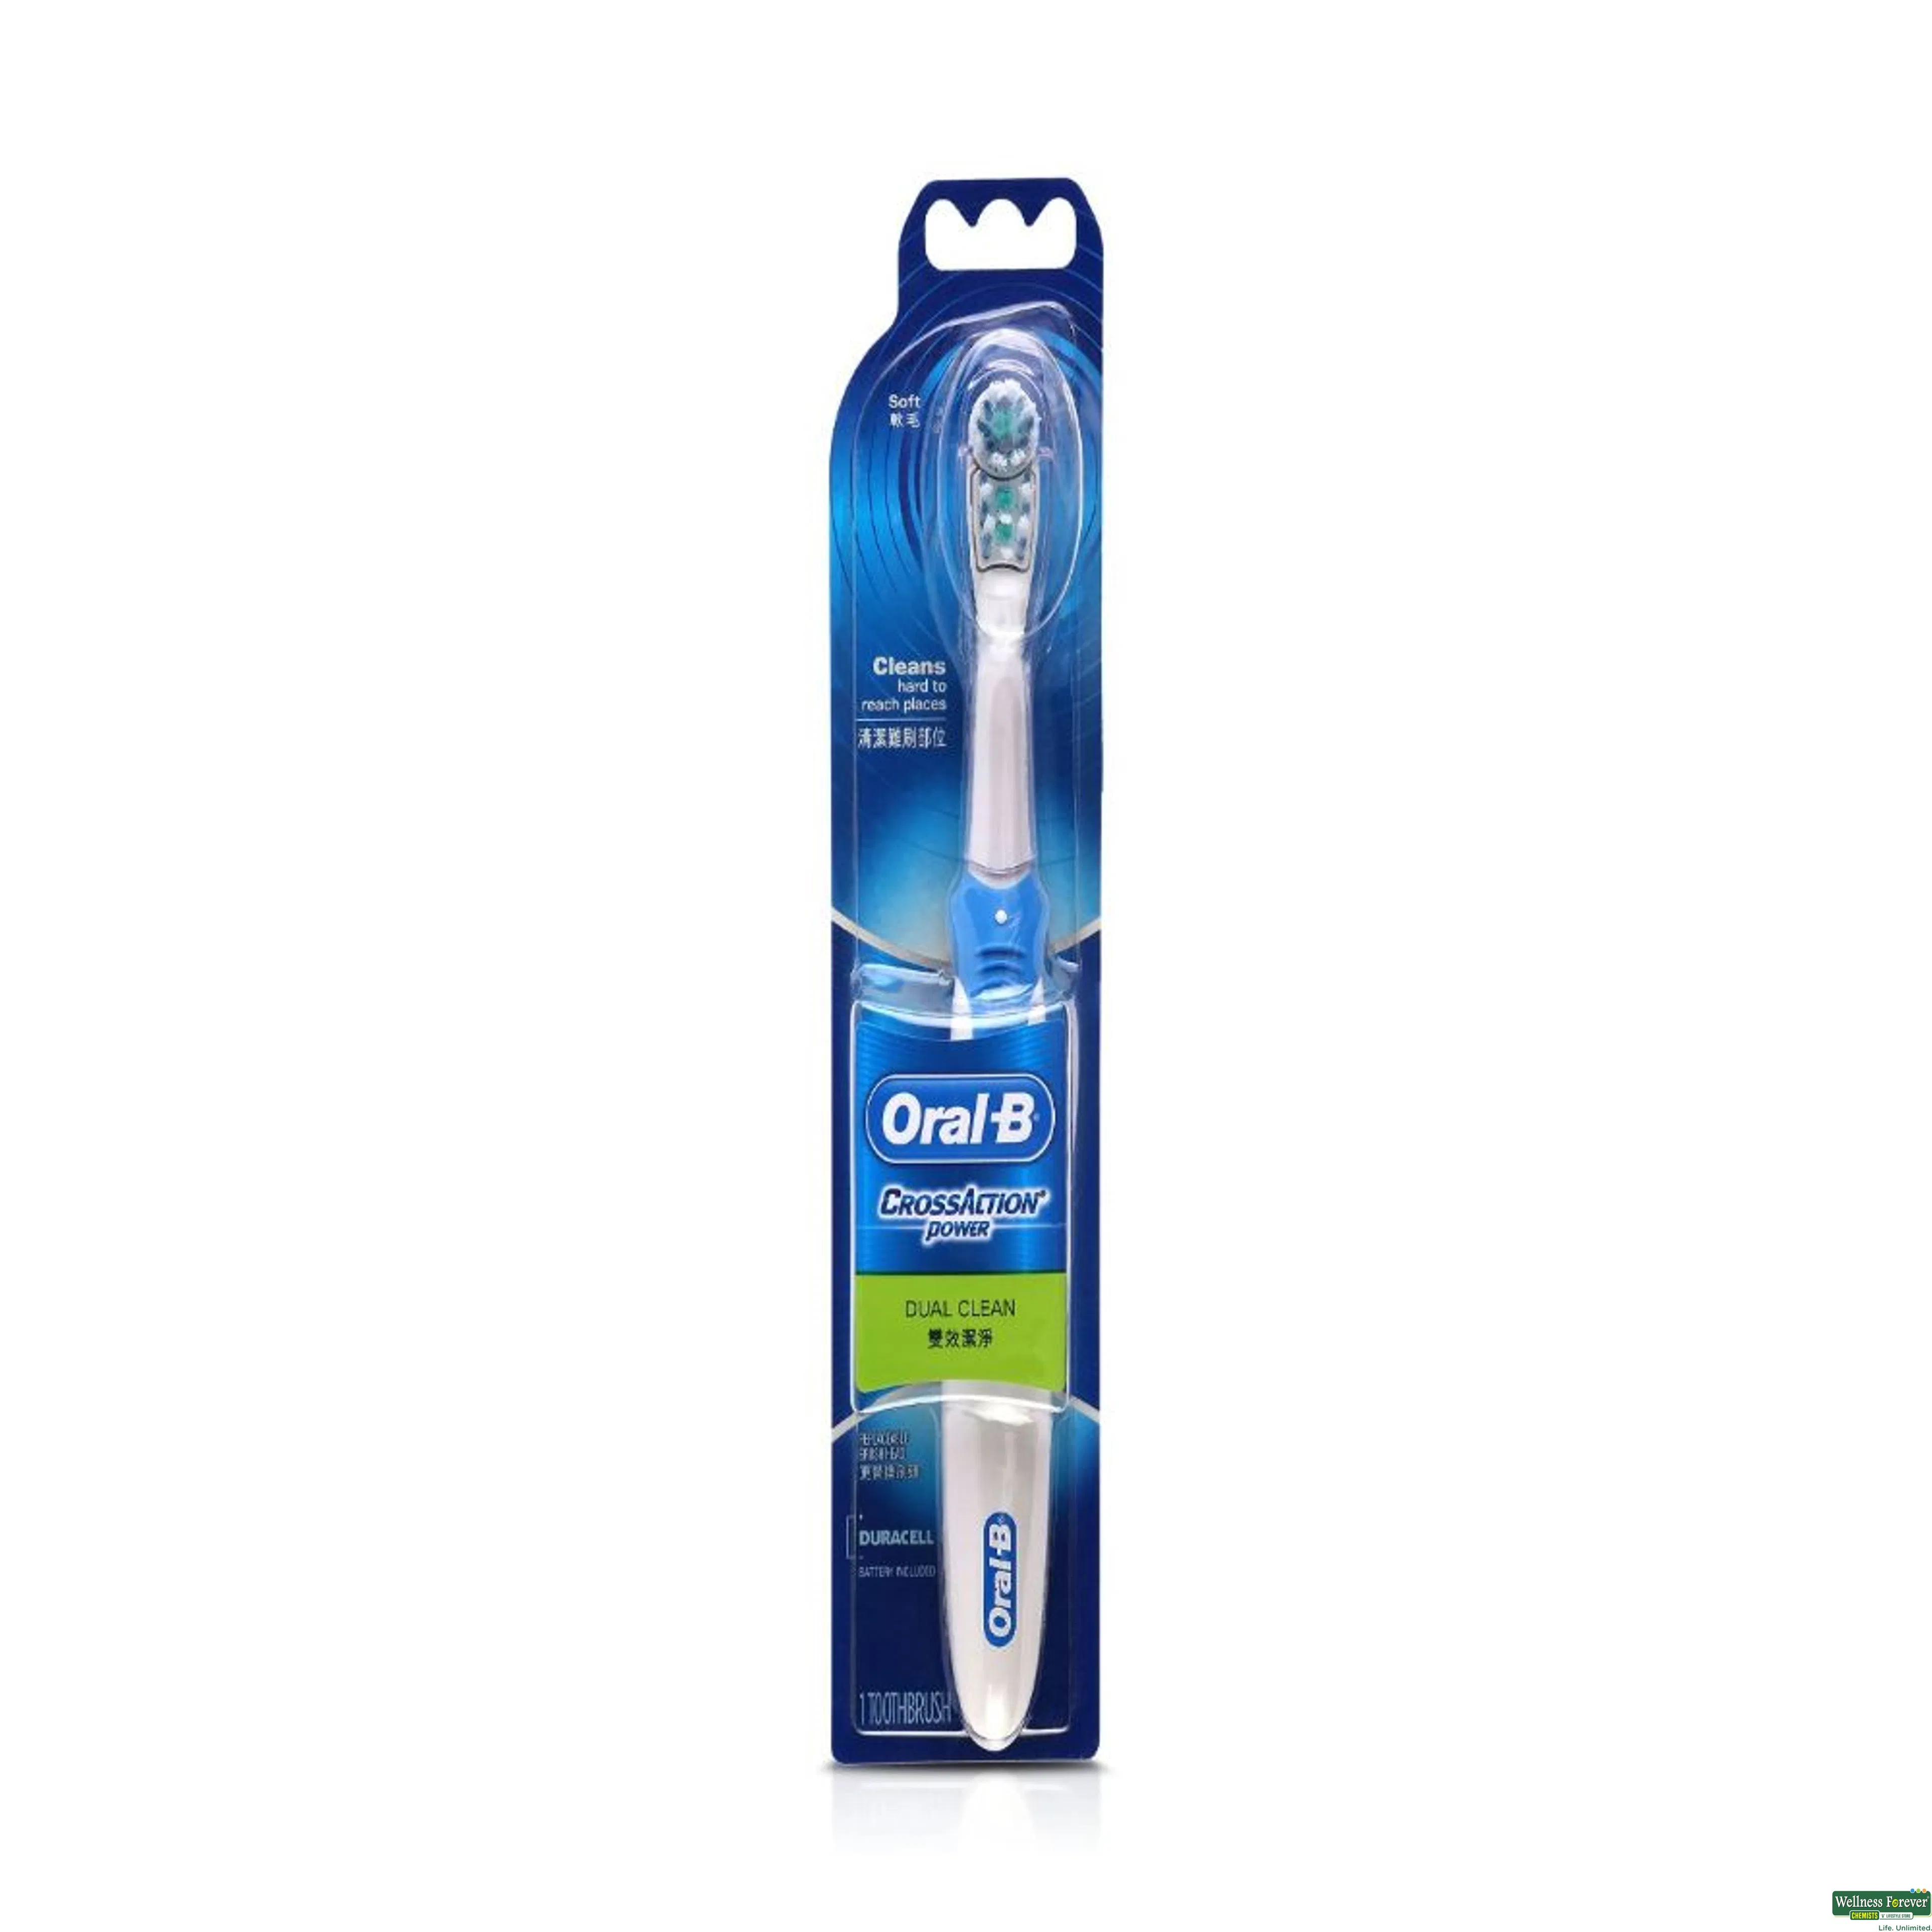 ORAL B T/BRUSH CROSS ACTION POW S 1PC-image